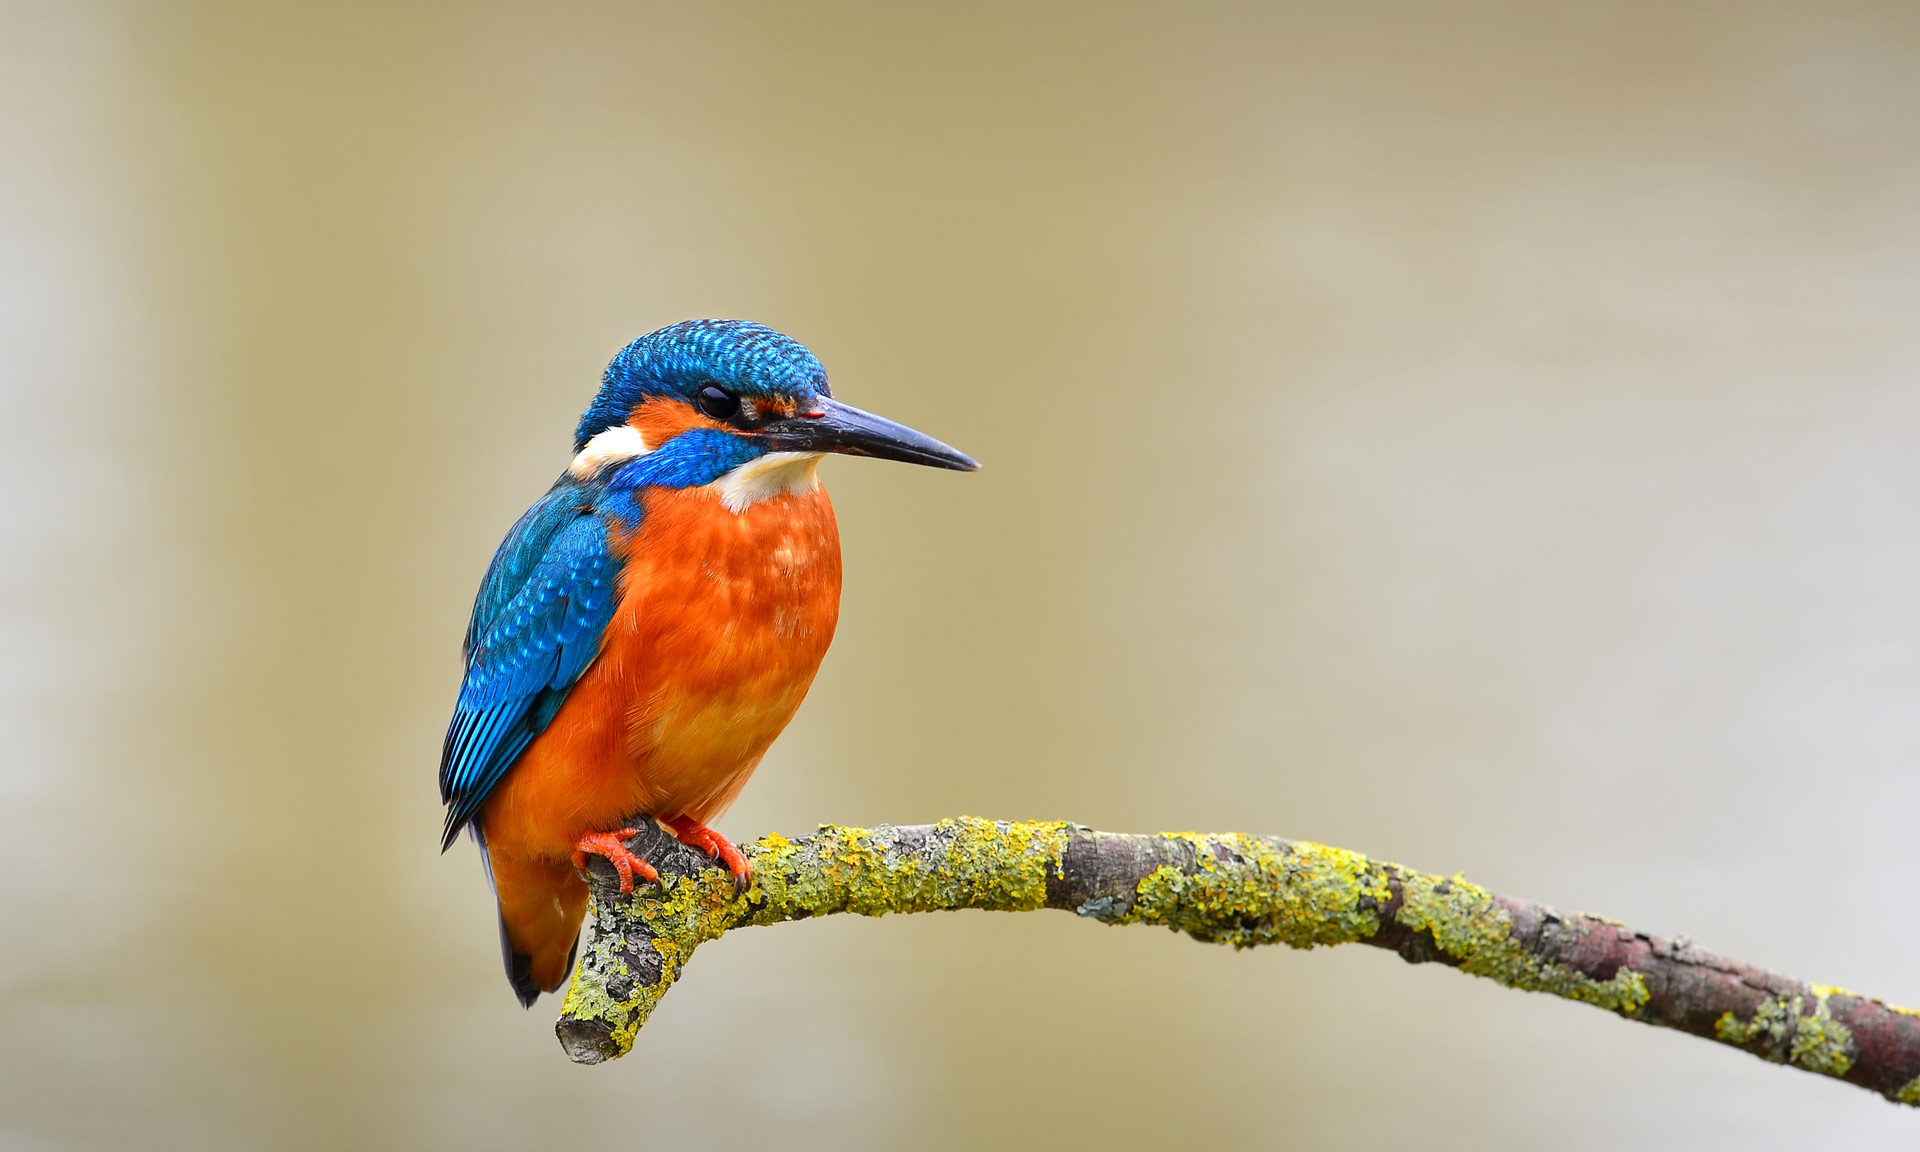 A kingfisher rests on a branch